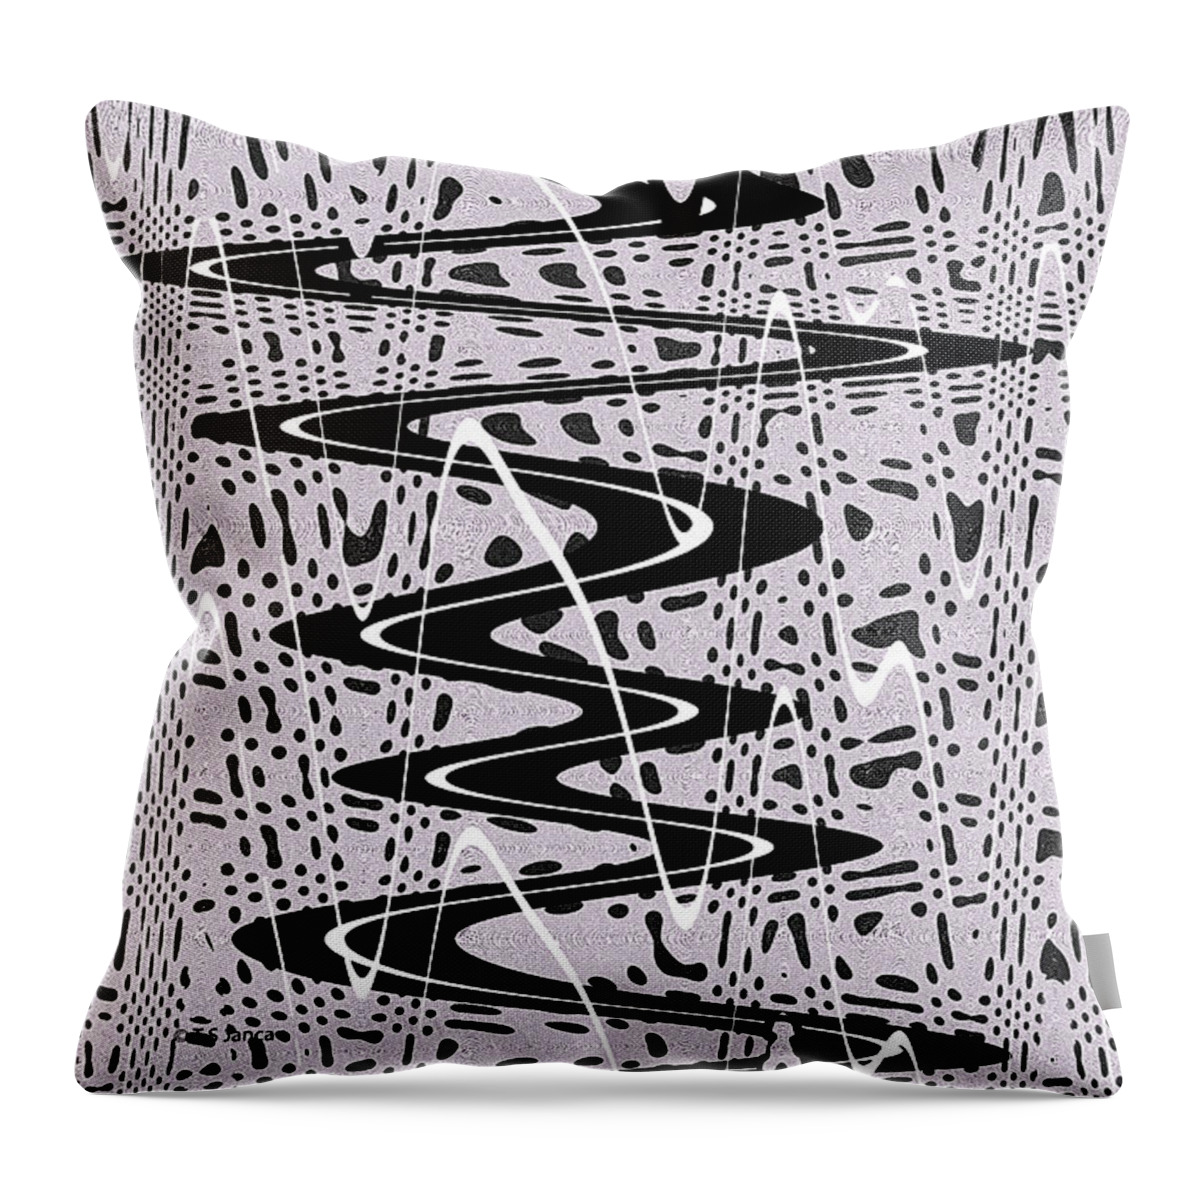 Highway Through The Wormhole Throw Pillow featuring the photograph Highway Through The Wormhole by Tom Janca